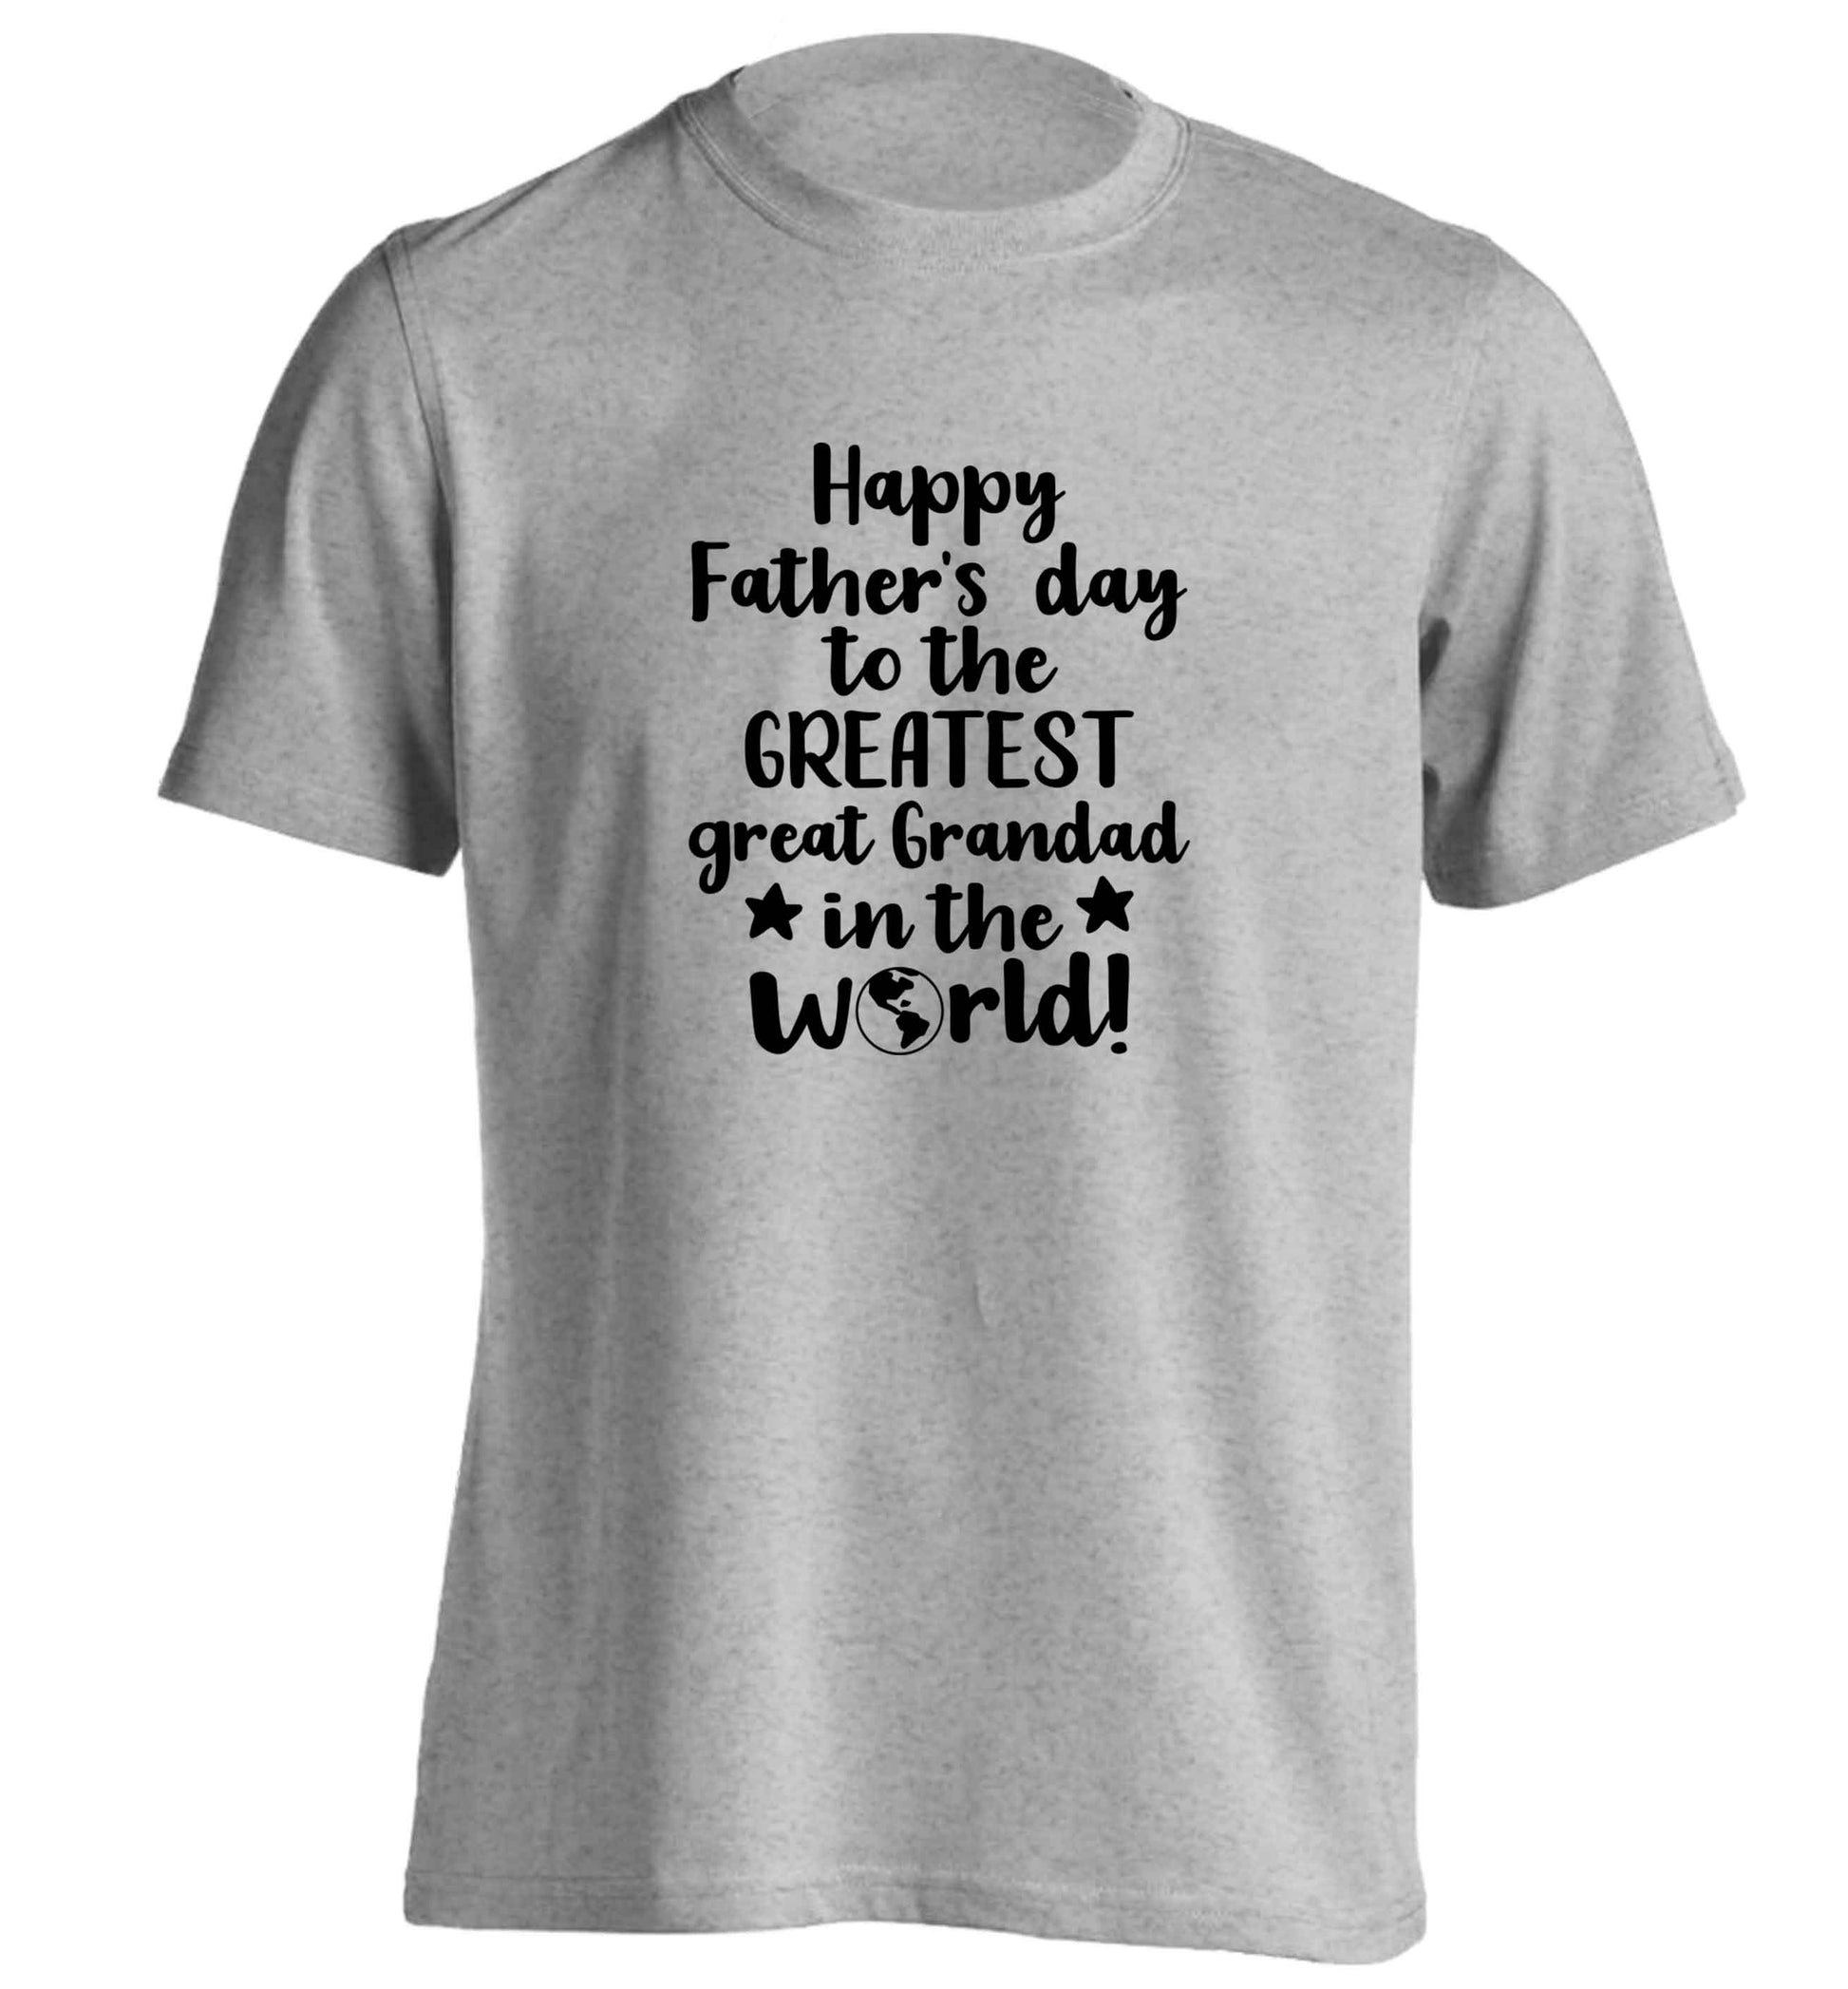 Happy Father's day to the greatest great grandad in the world adults unisex grey Tshirt 2XL